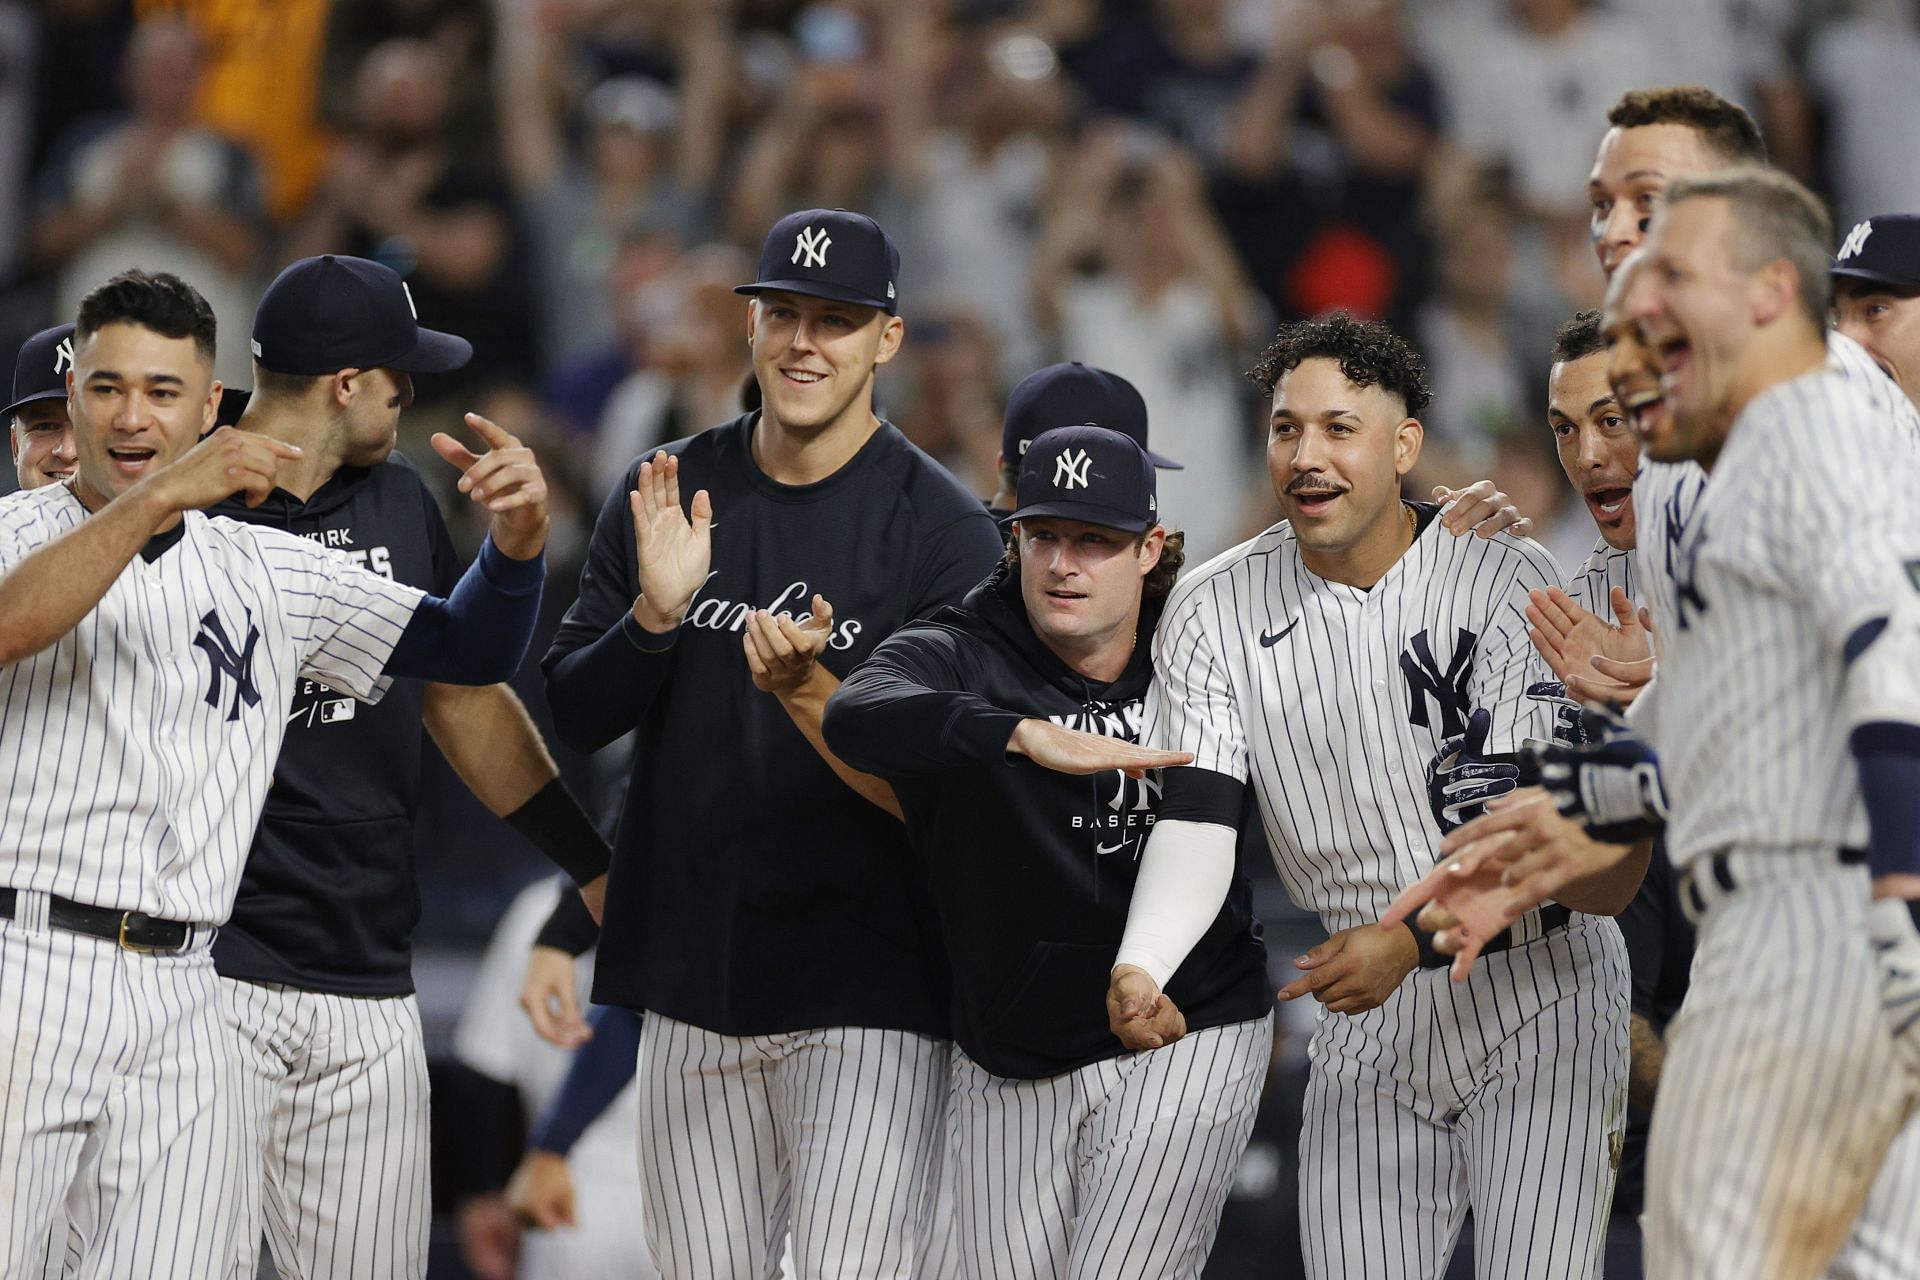 THIS TEAM IS SPECIAL” “Team of Destiny” - New York Yankees fans celebrate  as their team walks off the Houston Astros for a league-best 52nd win of  the season